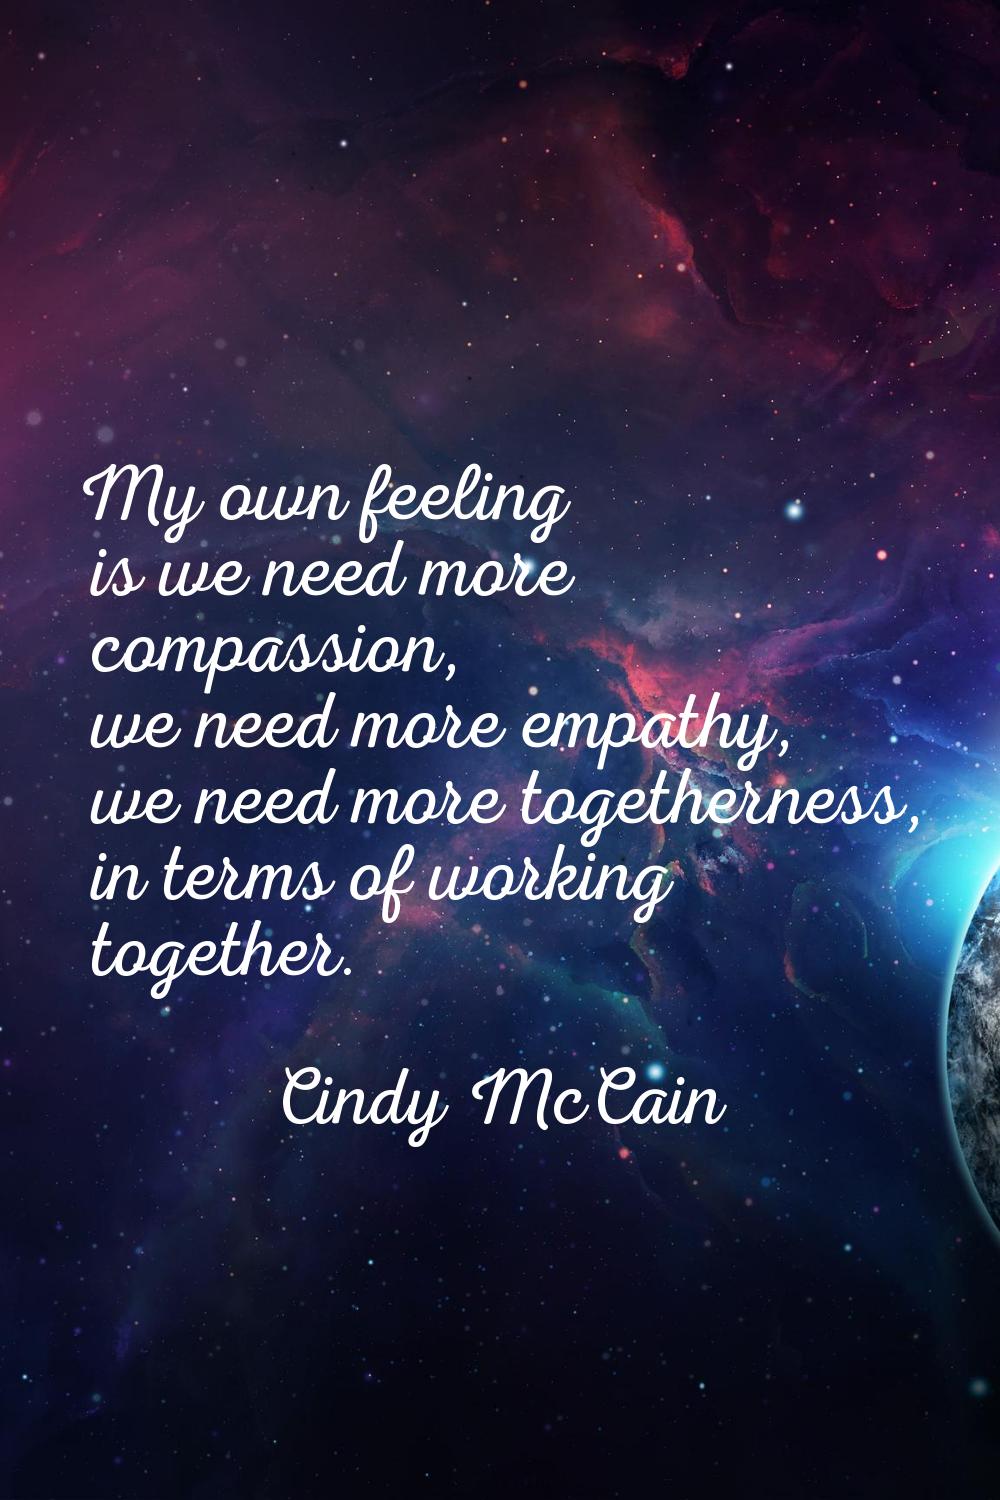 My own feeling is we need more compassion, we need more empathy, we need more togetherness, in term